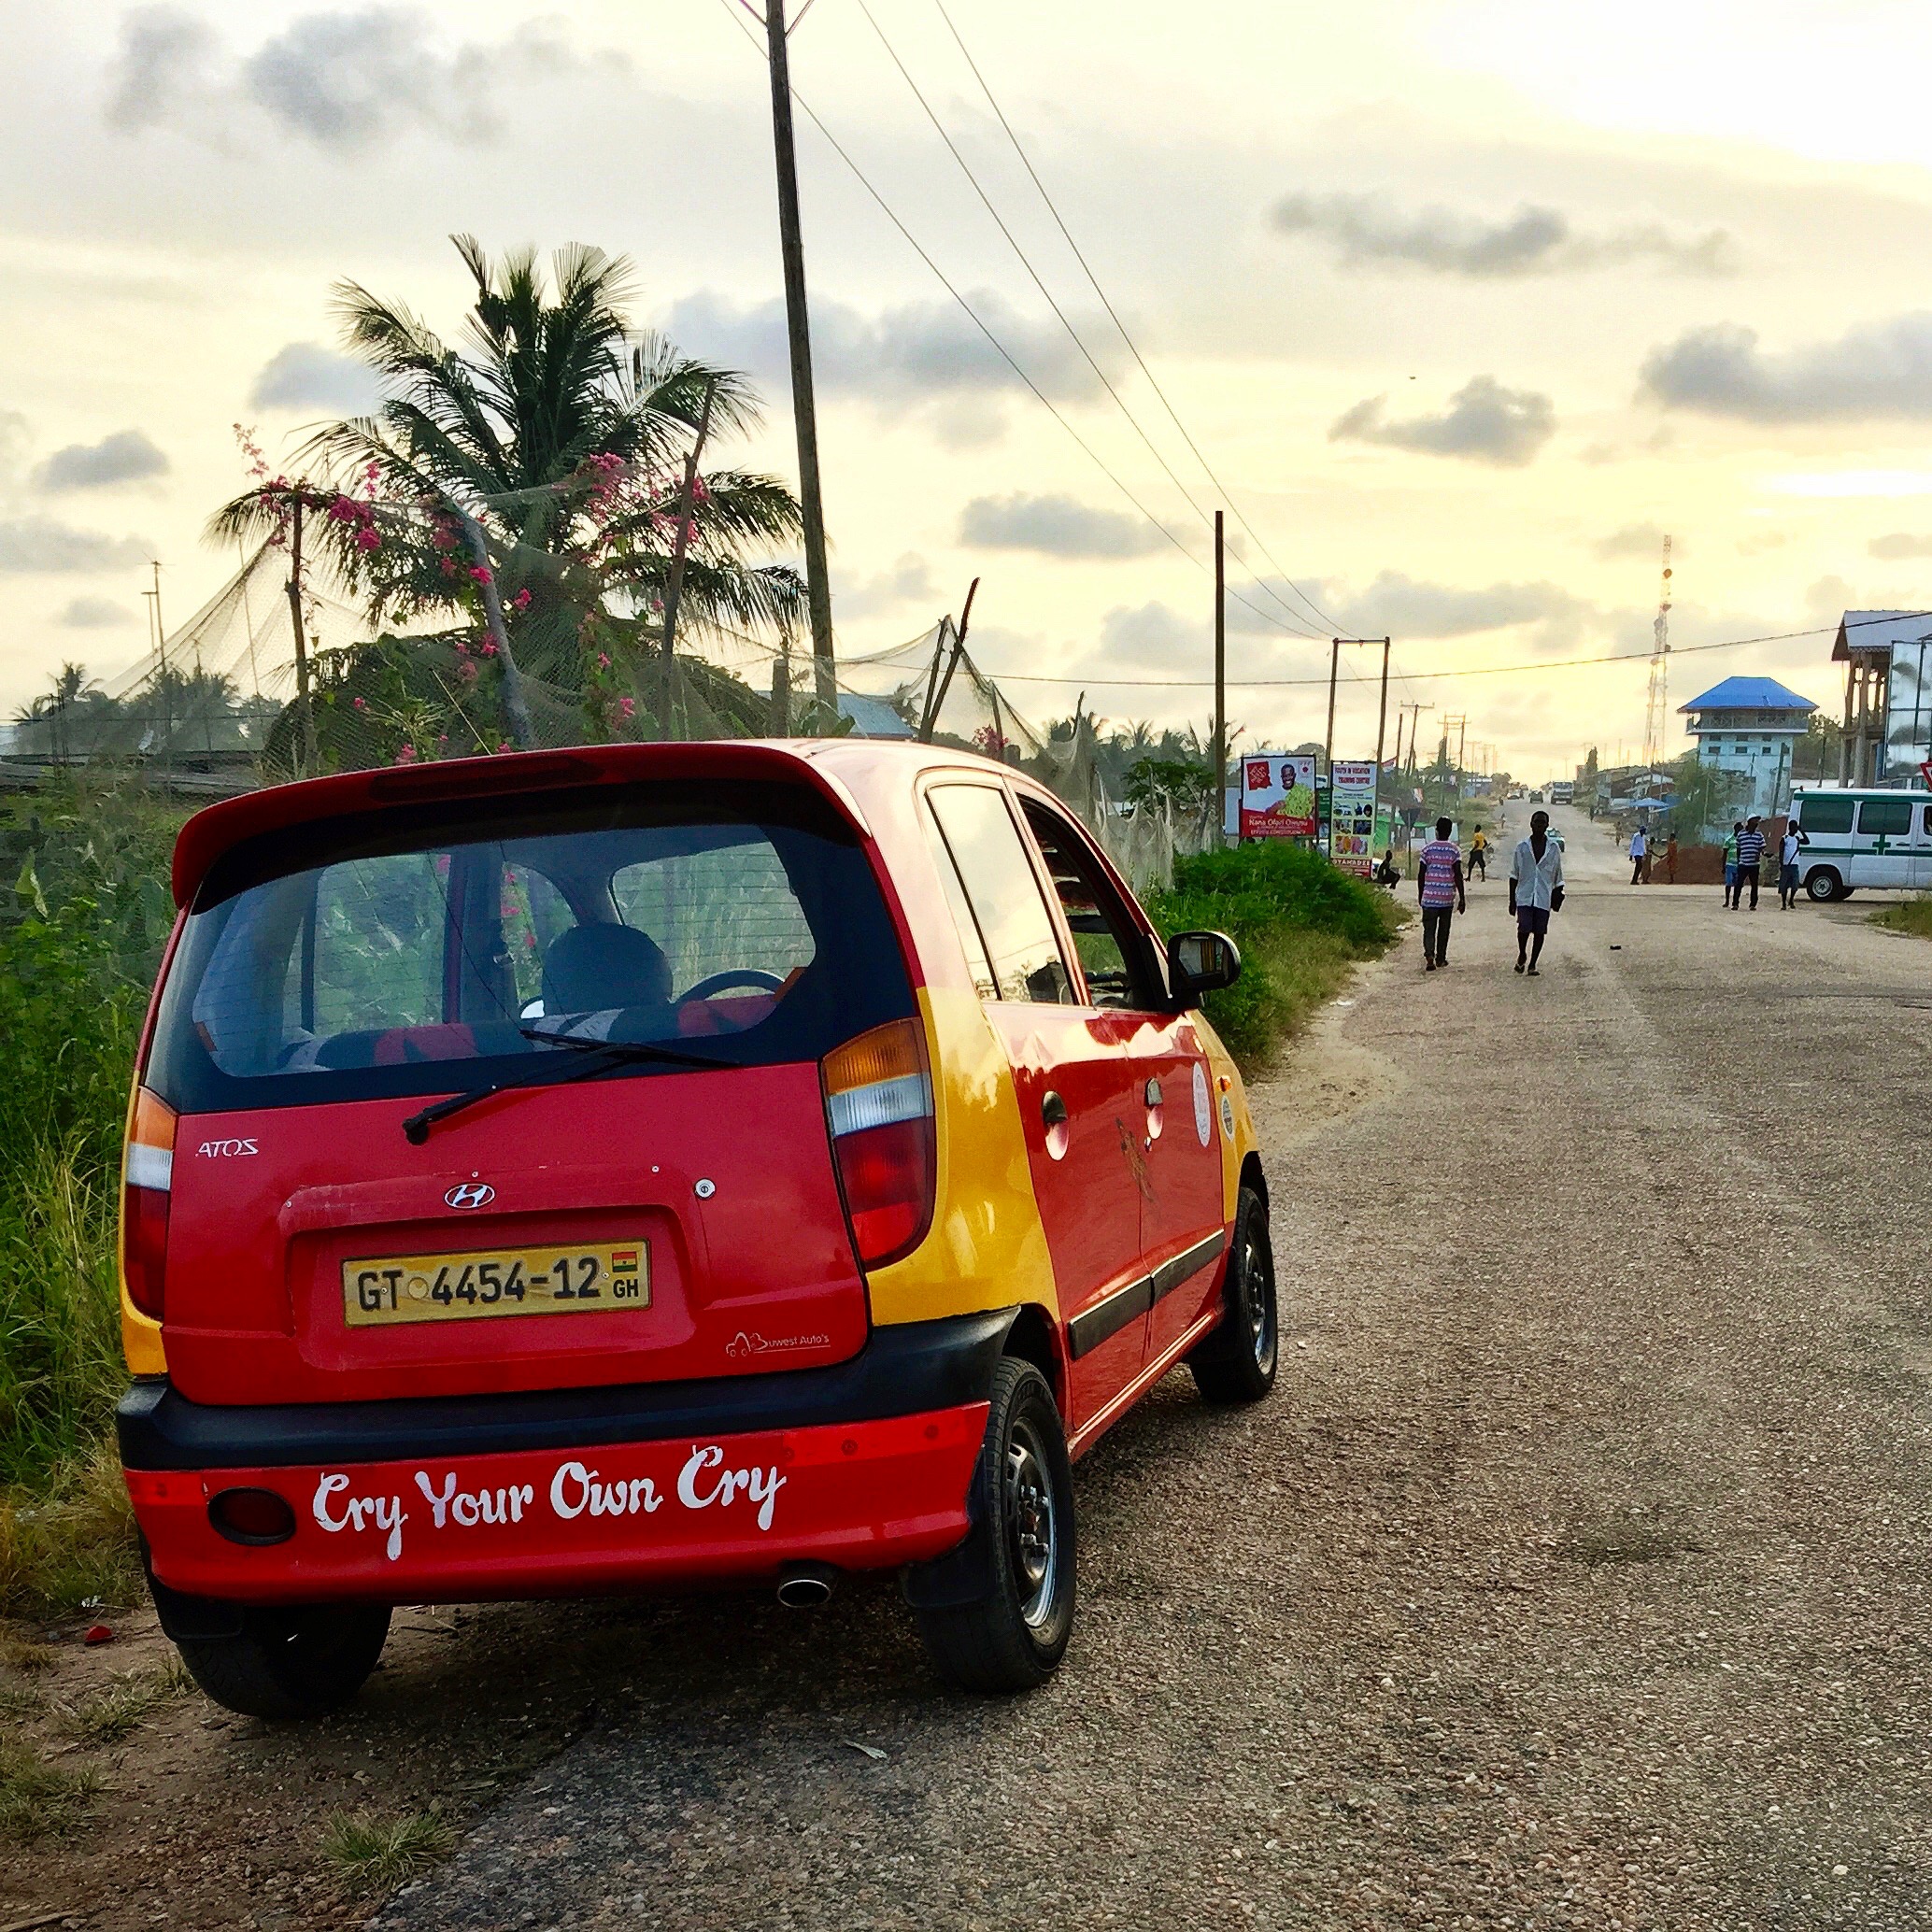 A red Hyundai Atos with Cry Your Own Cry painted on the bumper